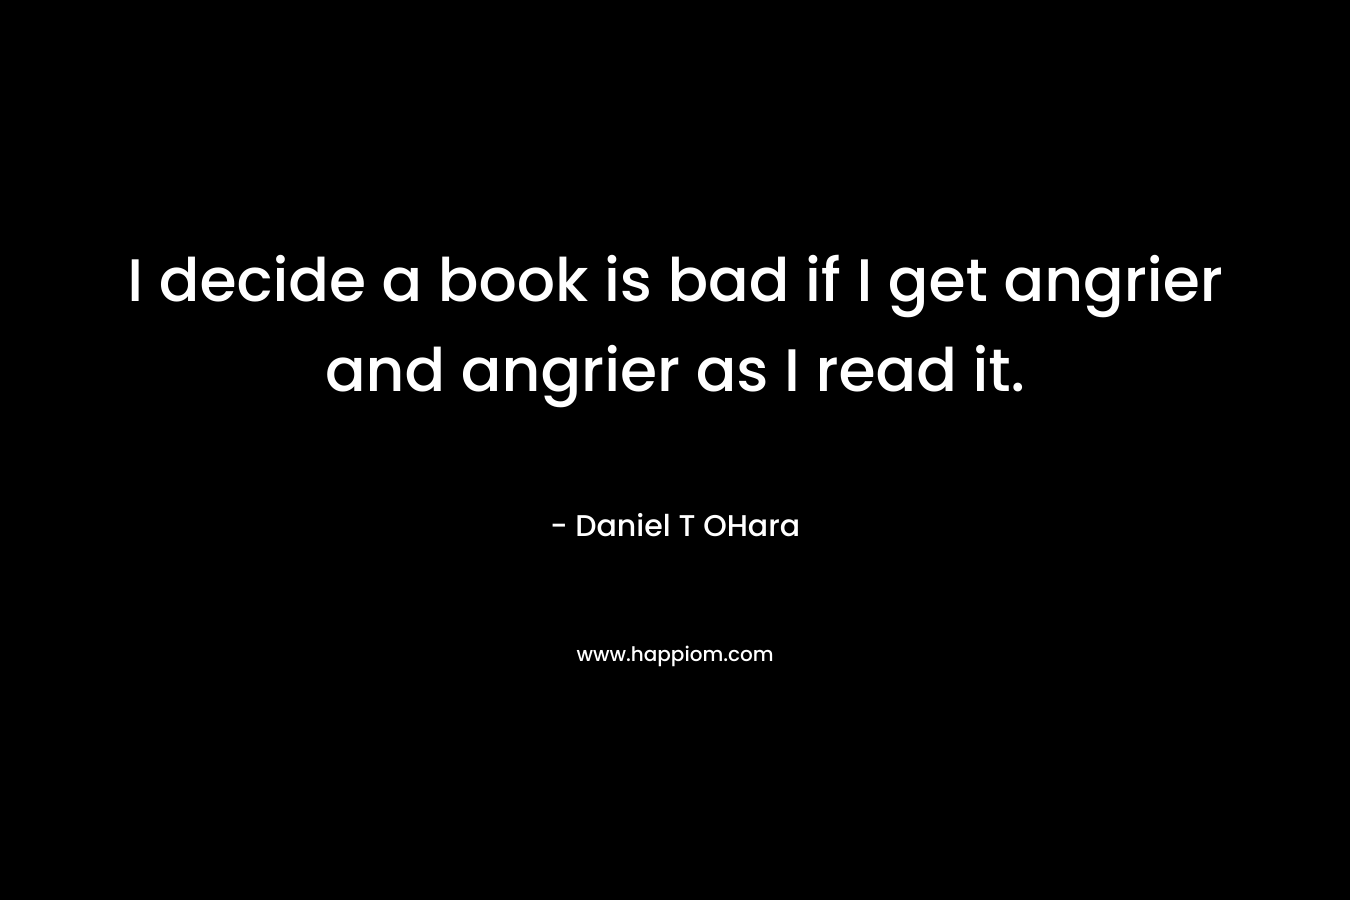 I decide a book is bad if I get angrier and angrier as I read it. – Daniel T OHara